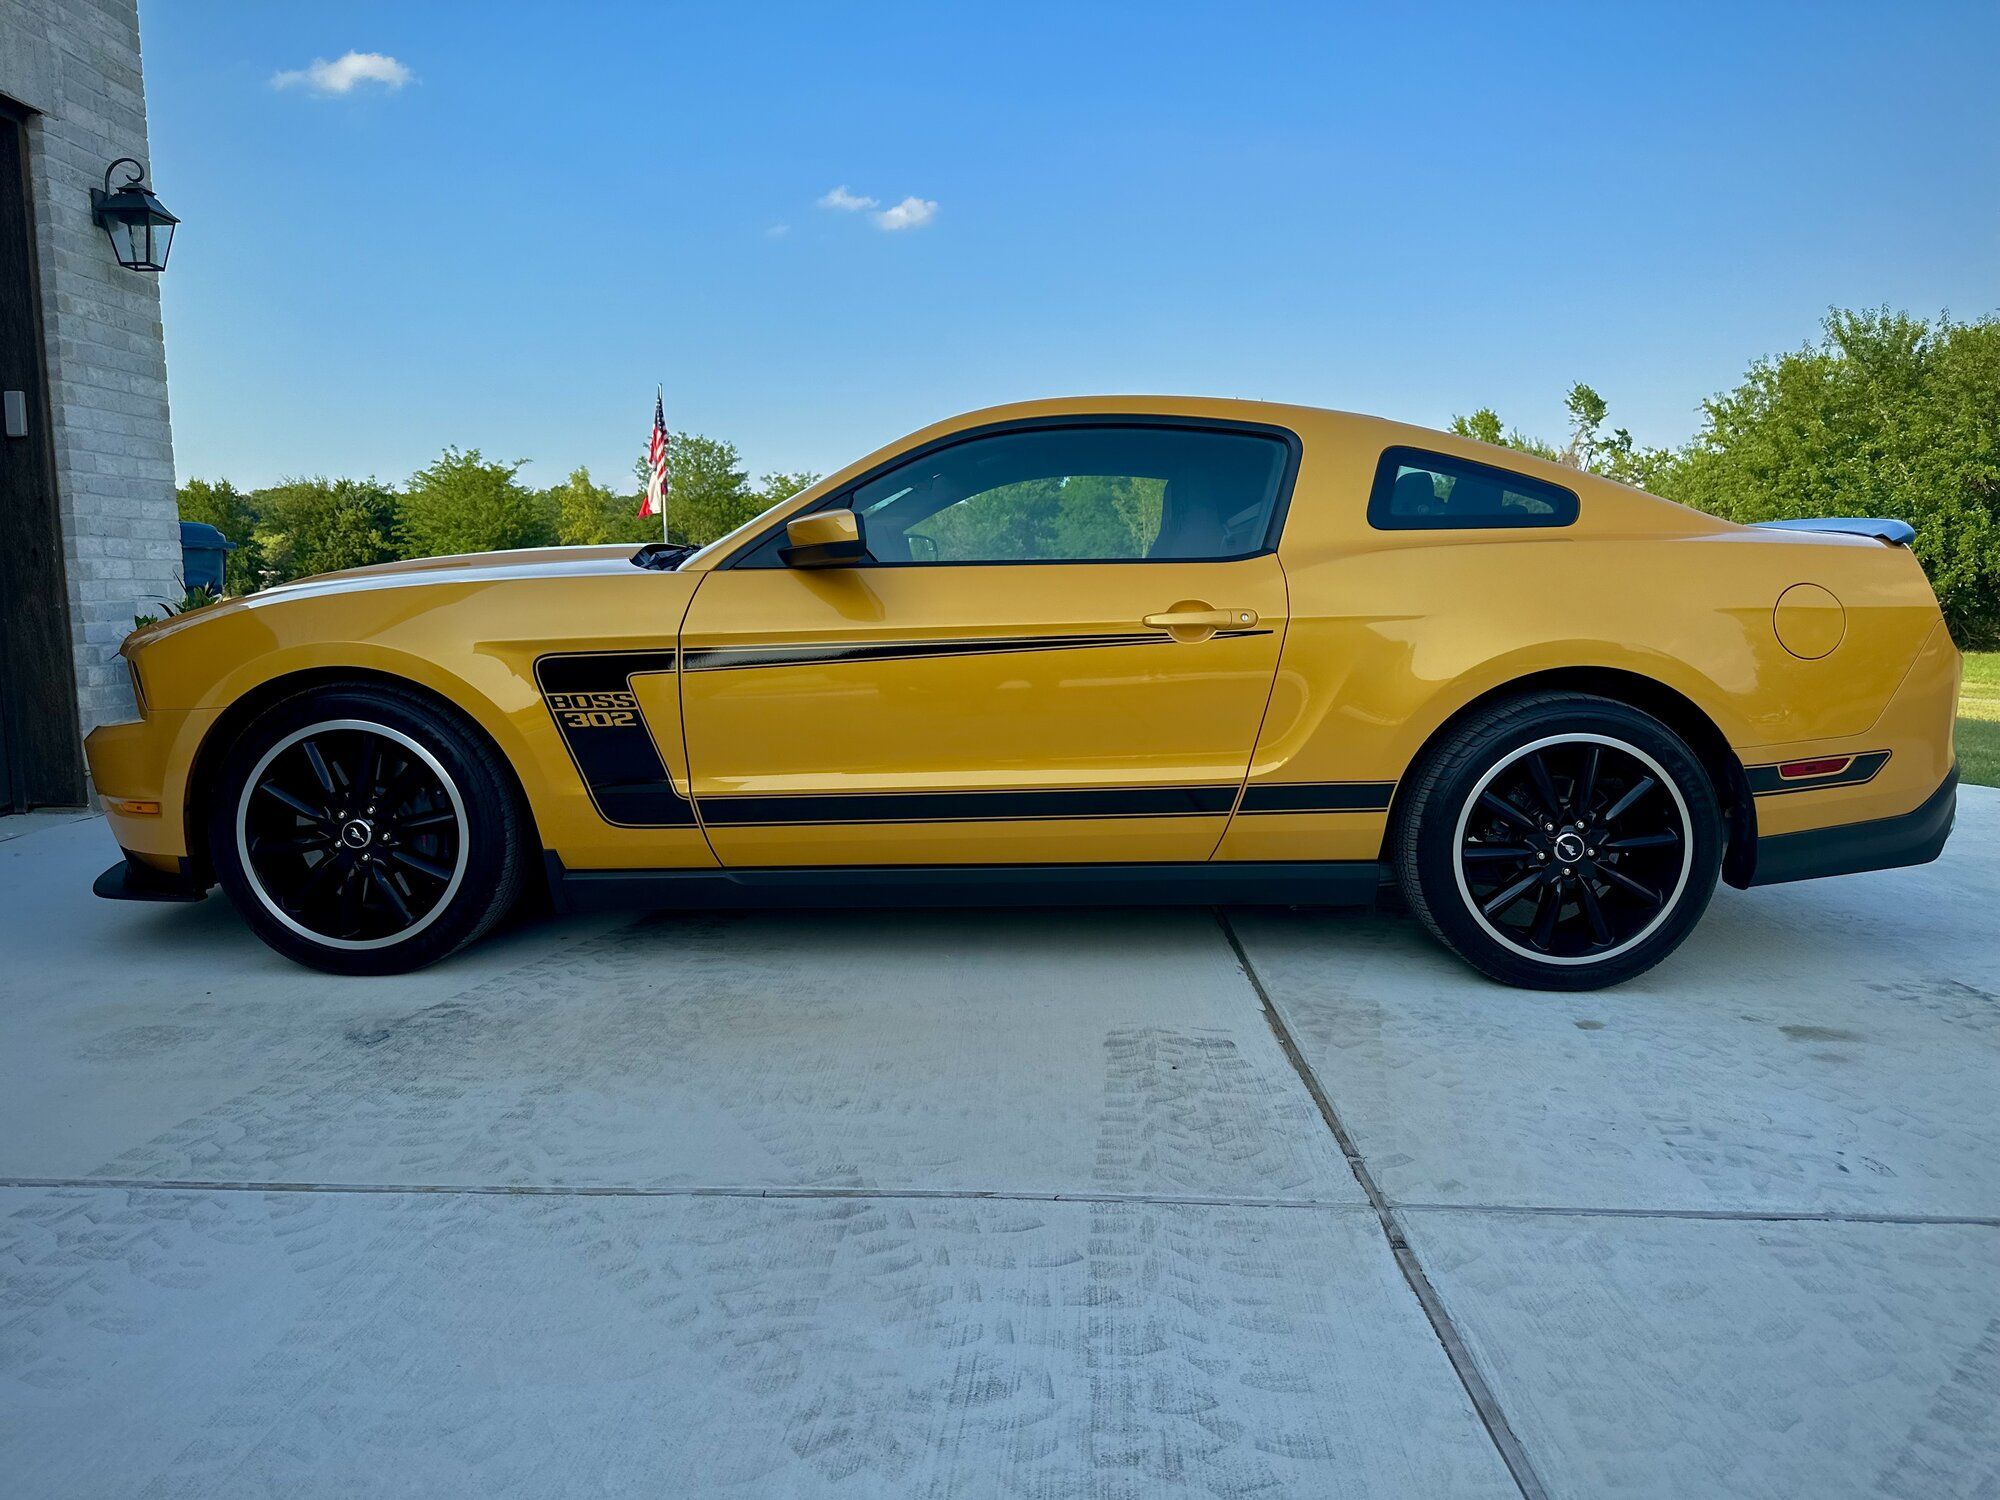 2012 Mustang
GT_50L  (Boss 302 introduction)